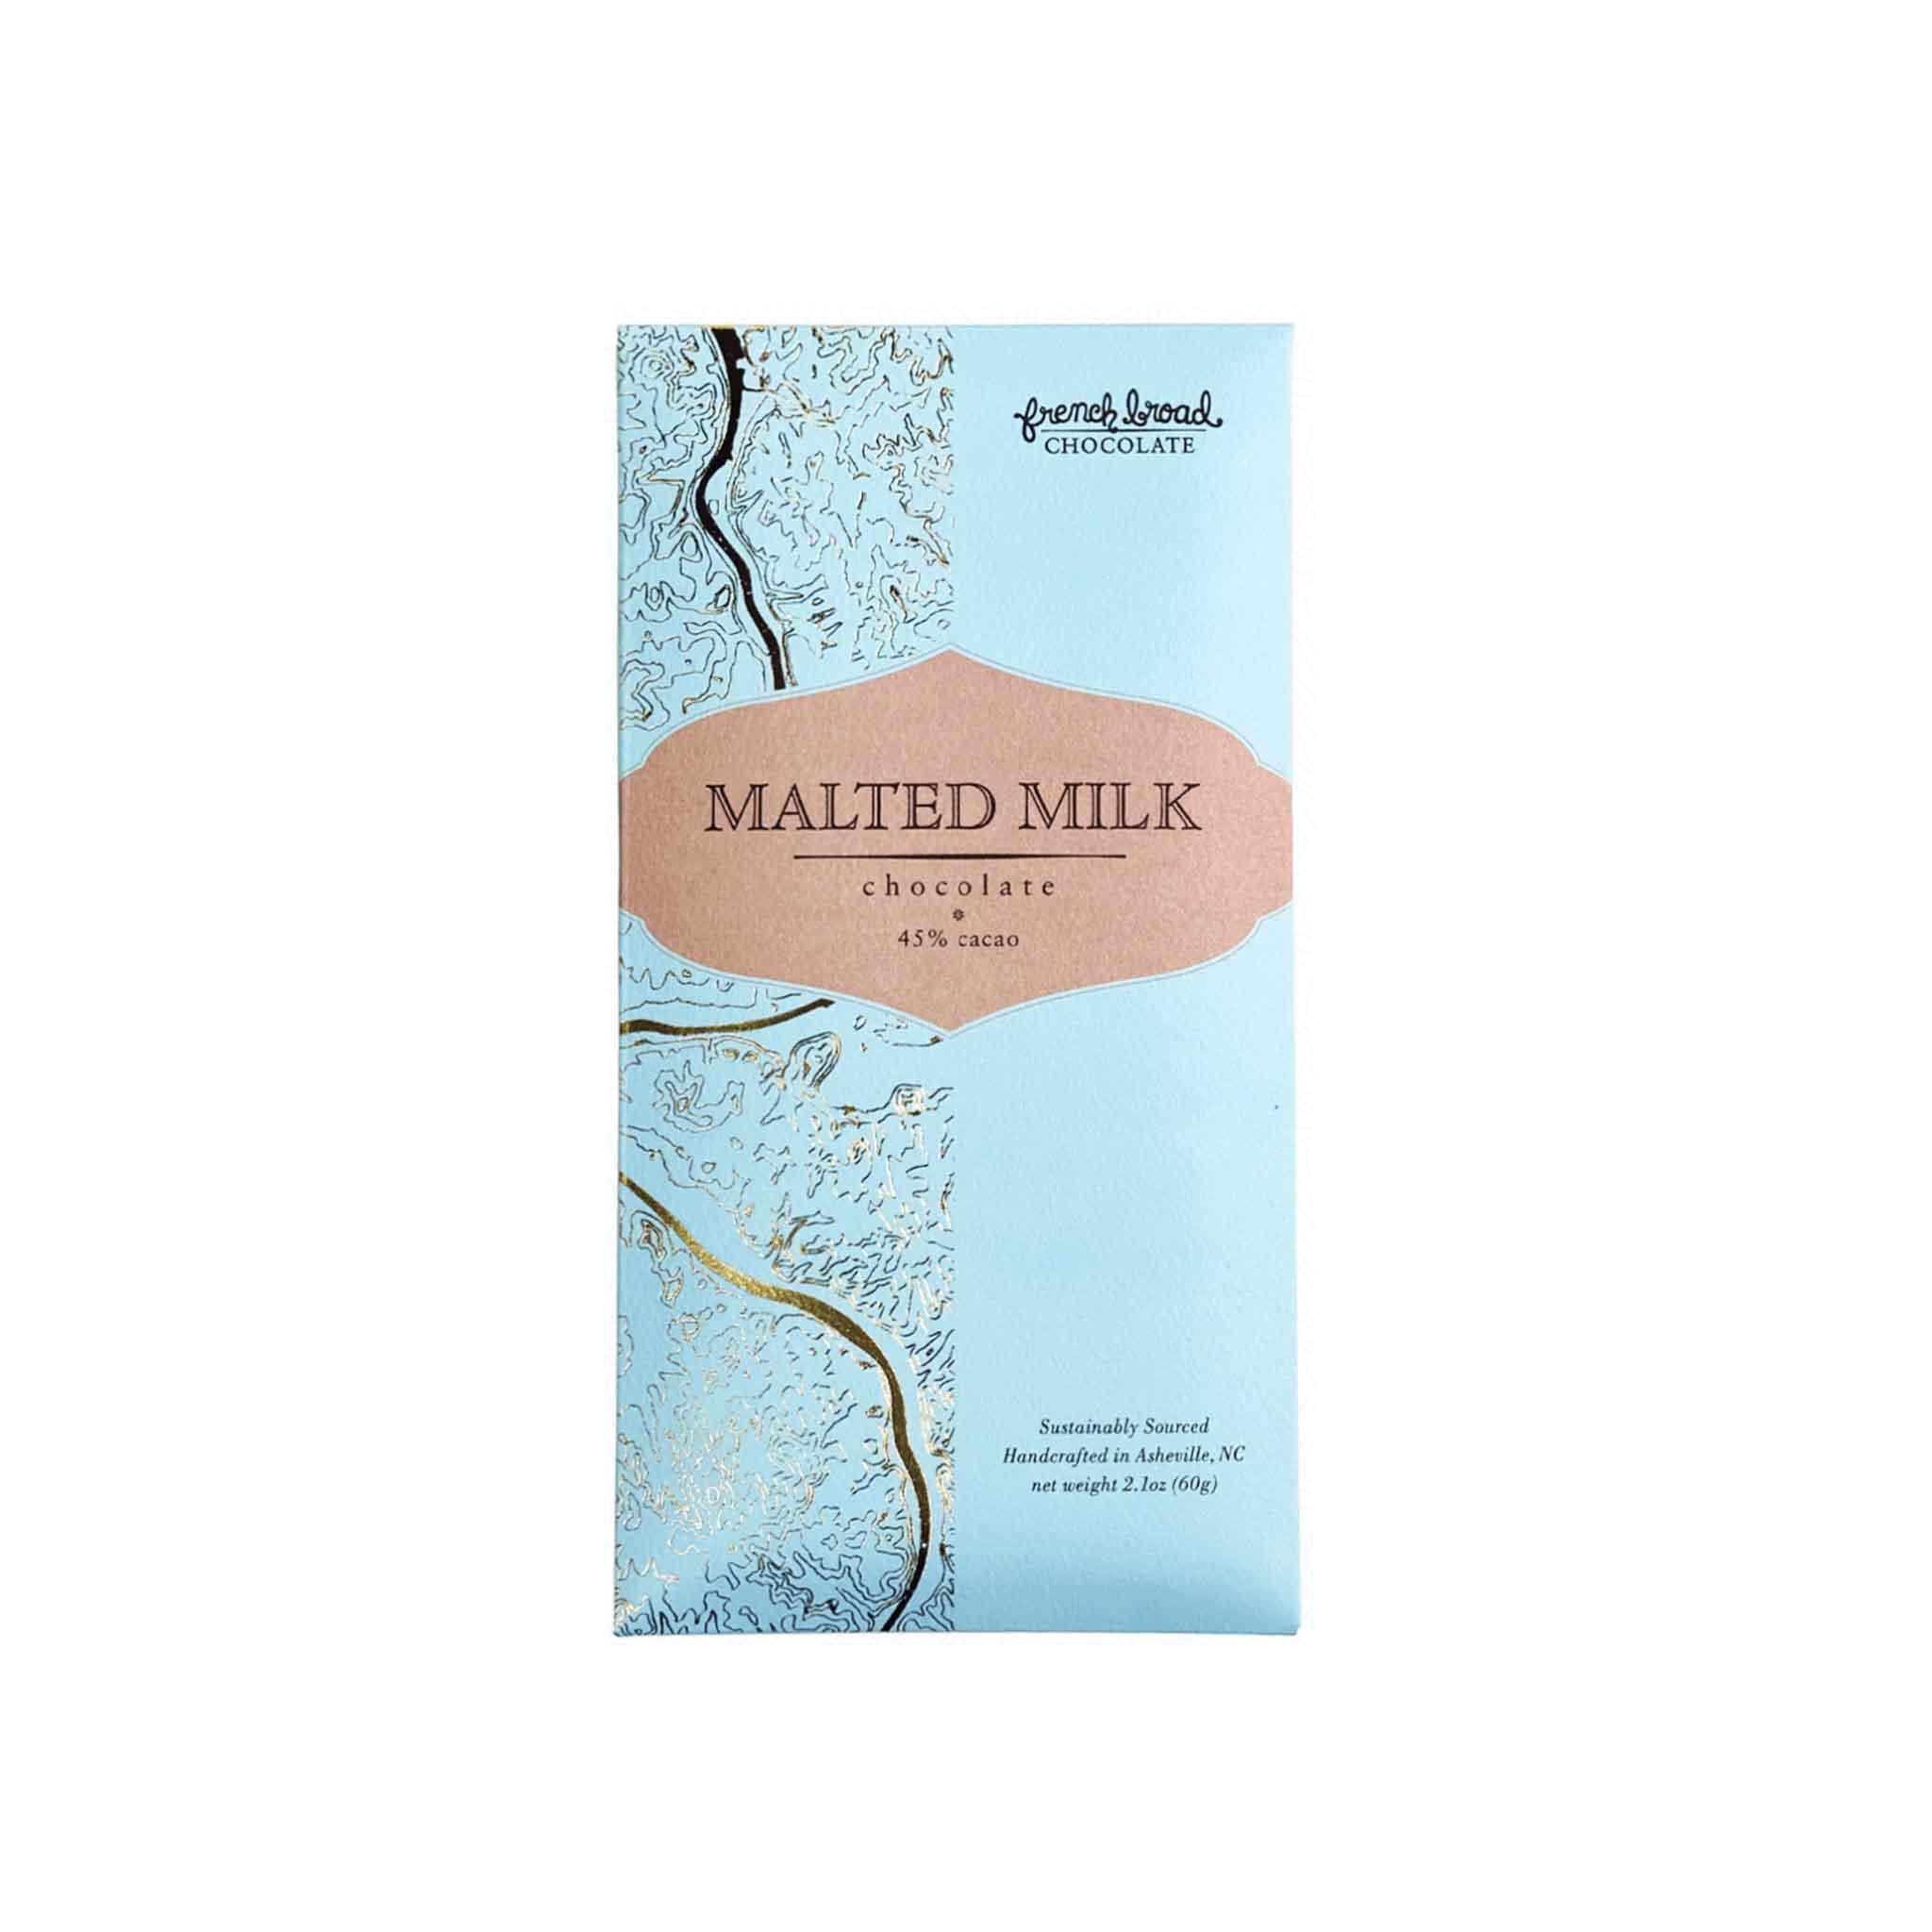 FRENCH BROAD 45% MALTED MILK CHOCOLATE 60g